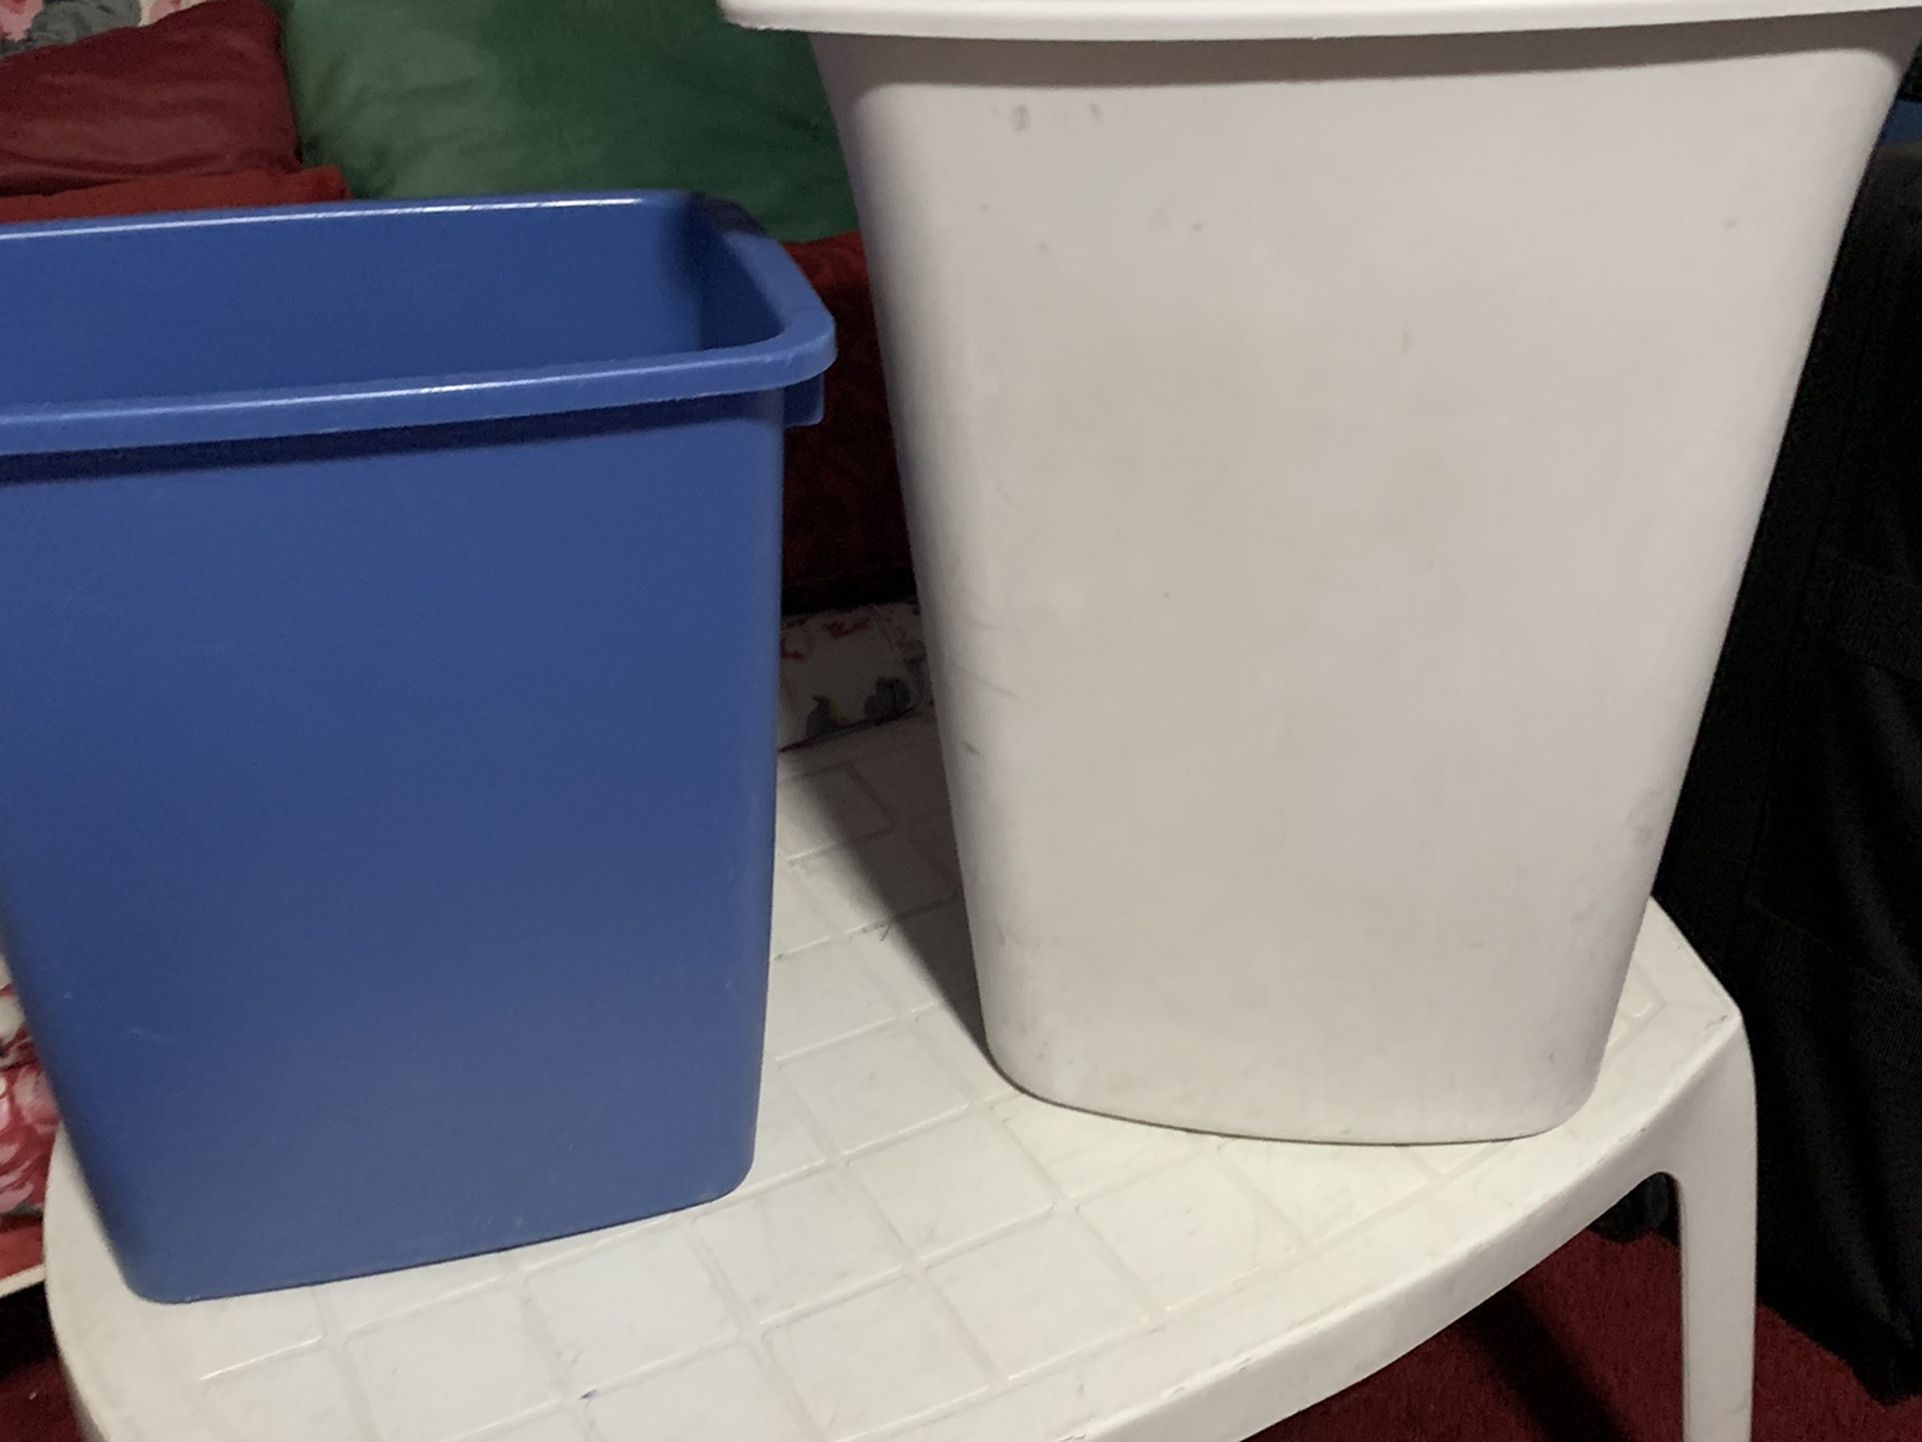 Sterlite White Garbage Basket & Underbed Storage Container, and Rubbermaid Blue Garbage Basket, All for $10